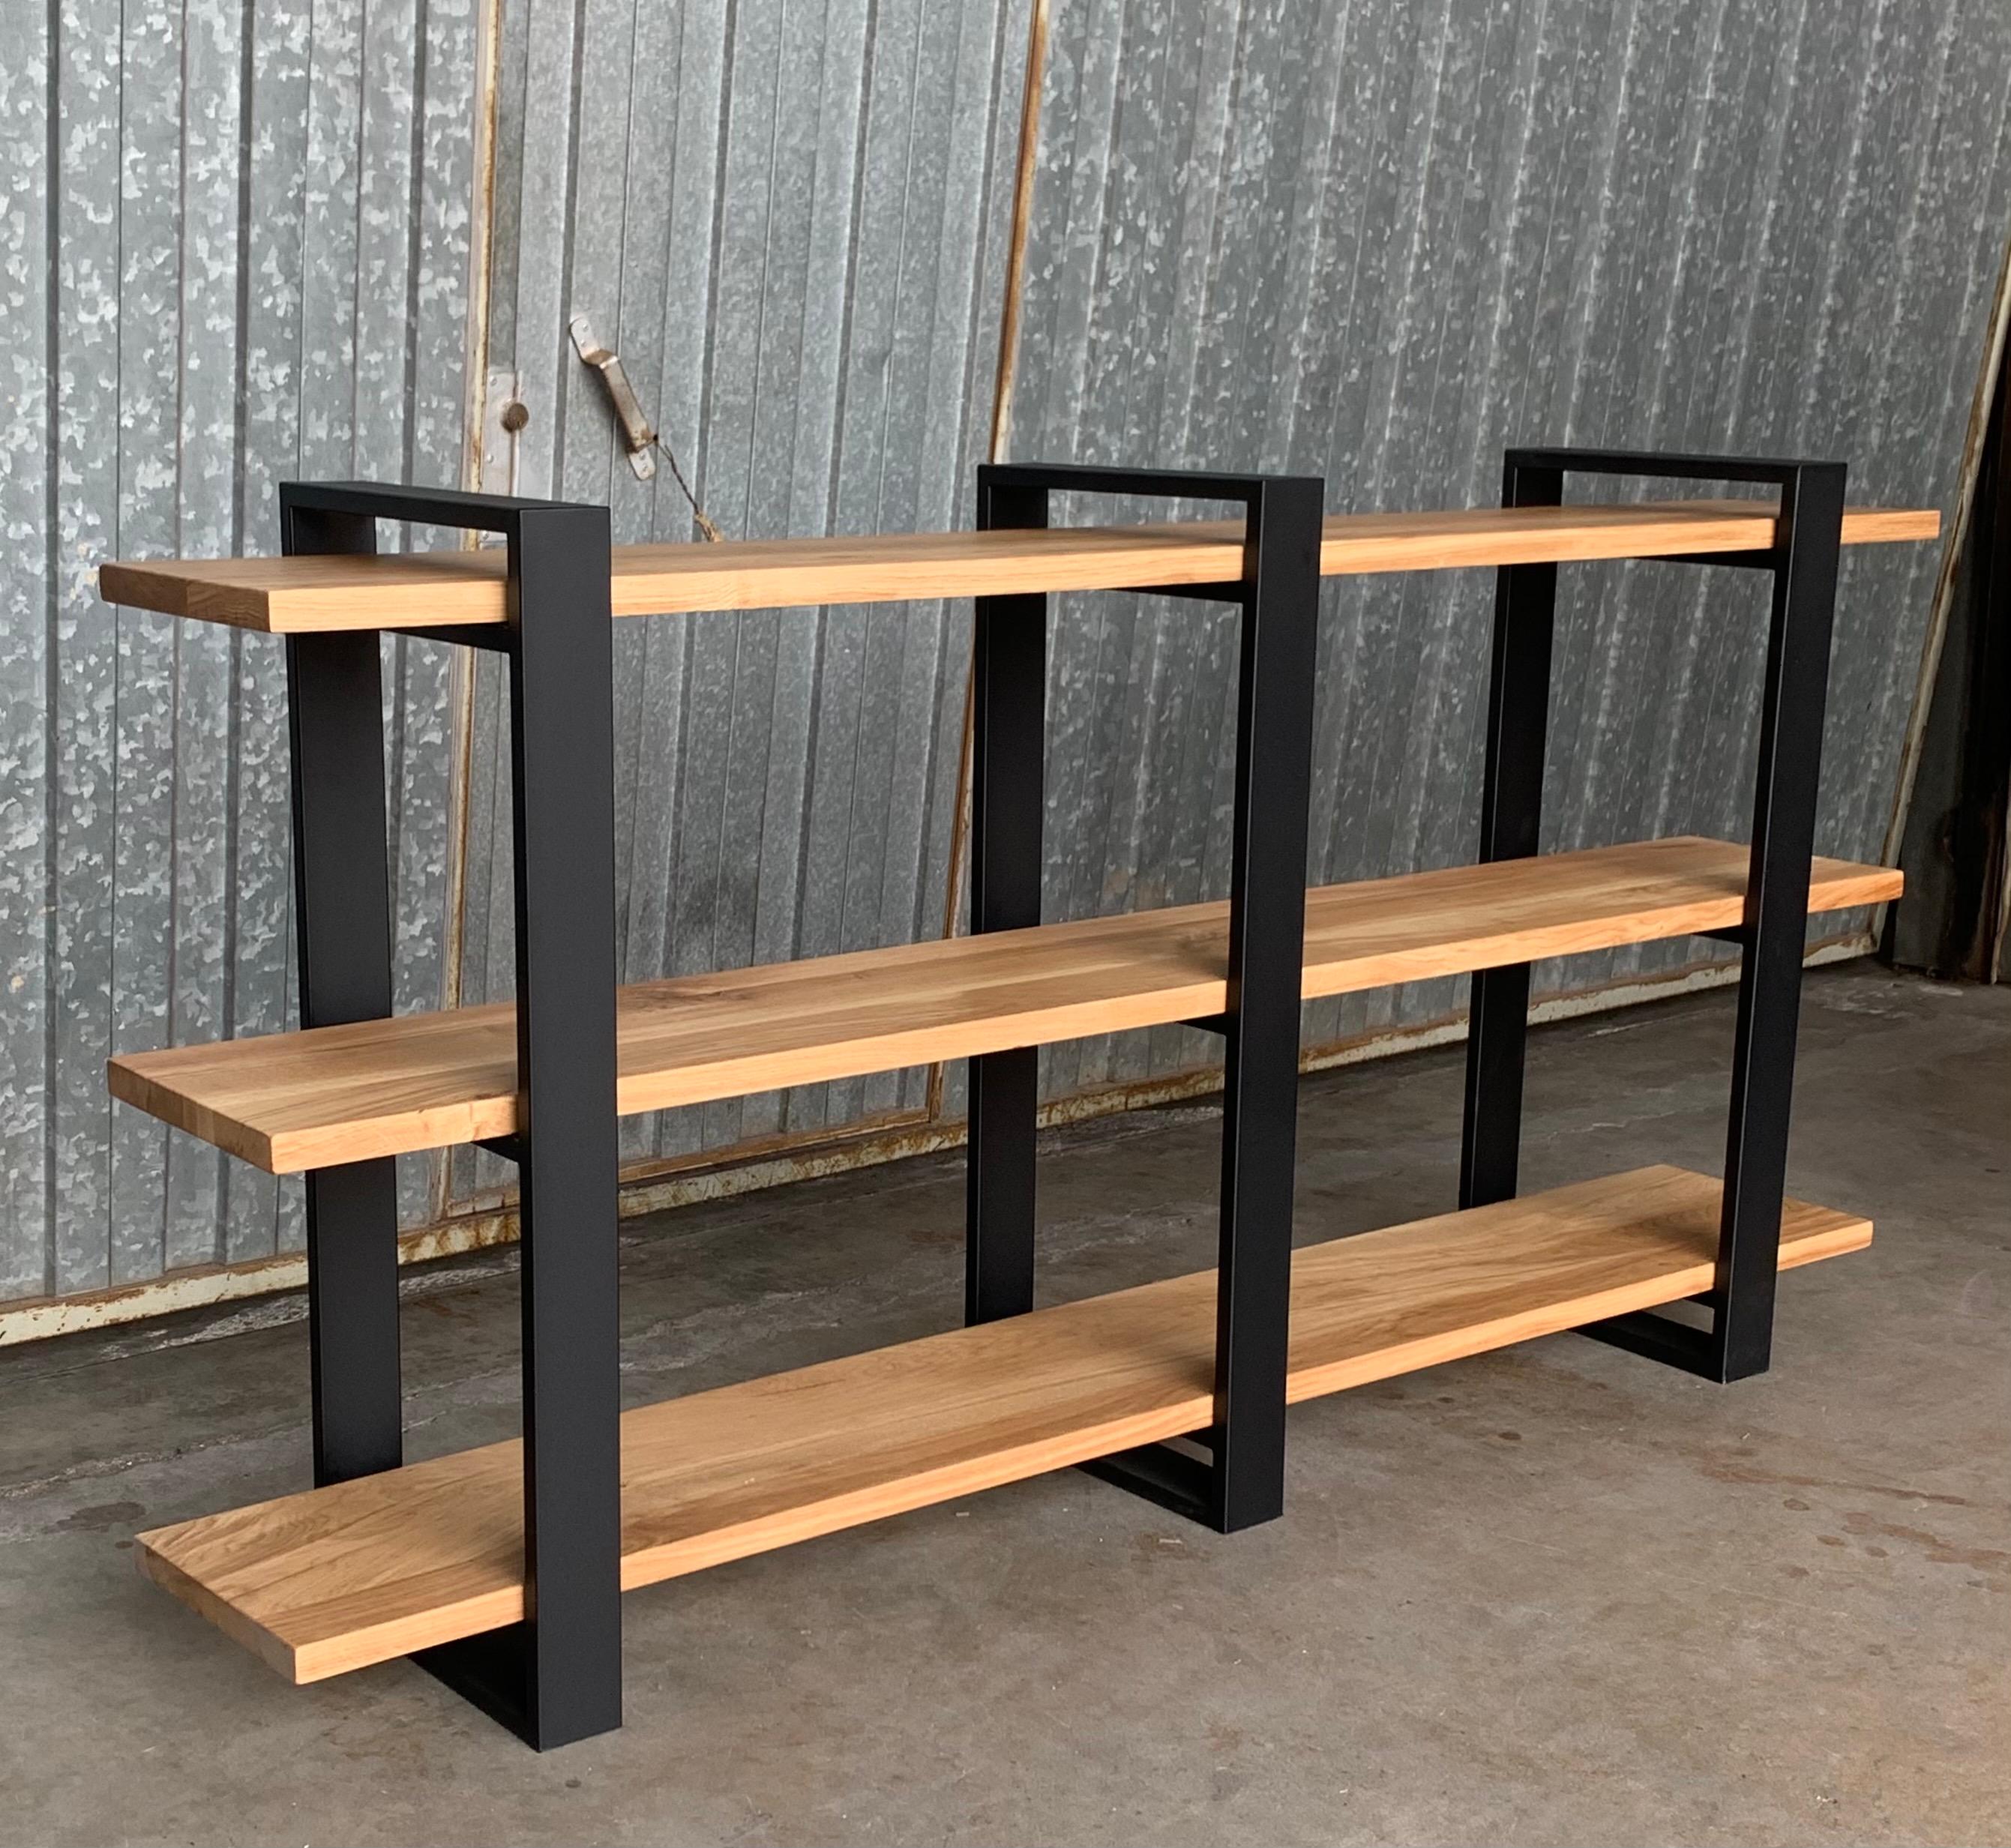 New custom etagere with three oak shelves and iron structure

You can choose the dimensions, the colors and the wood.